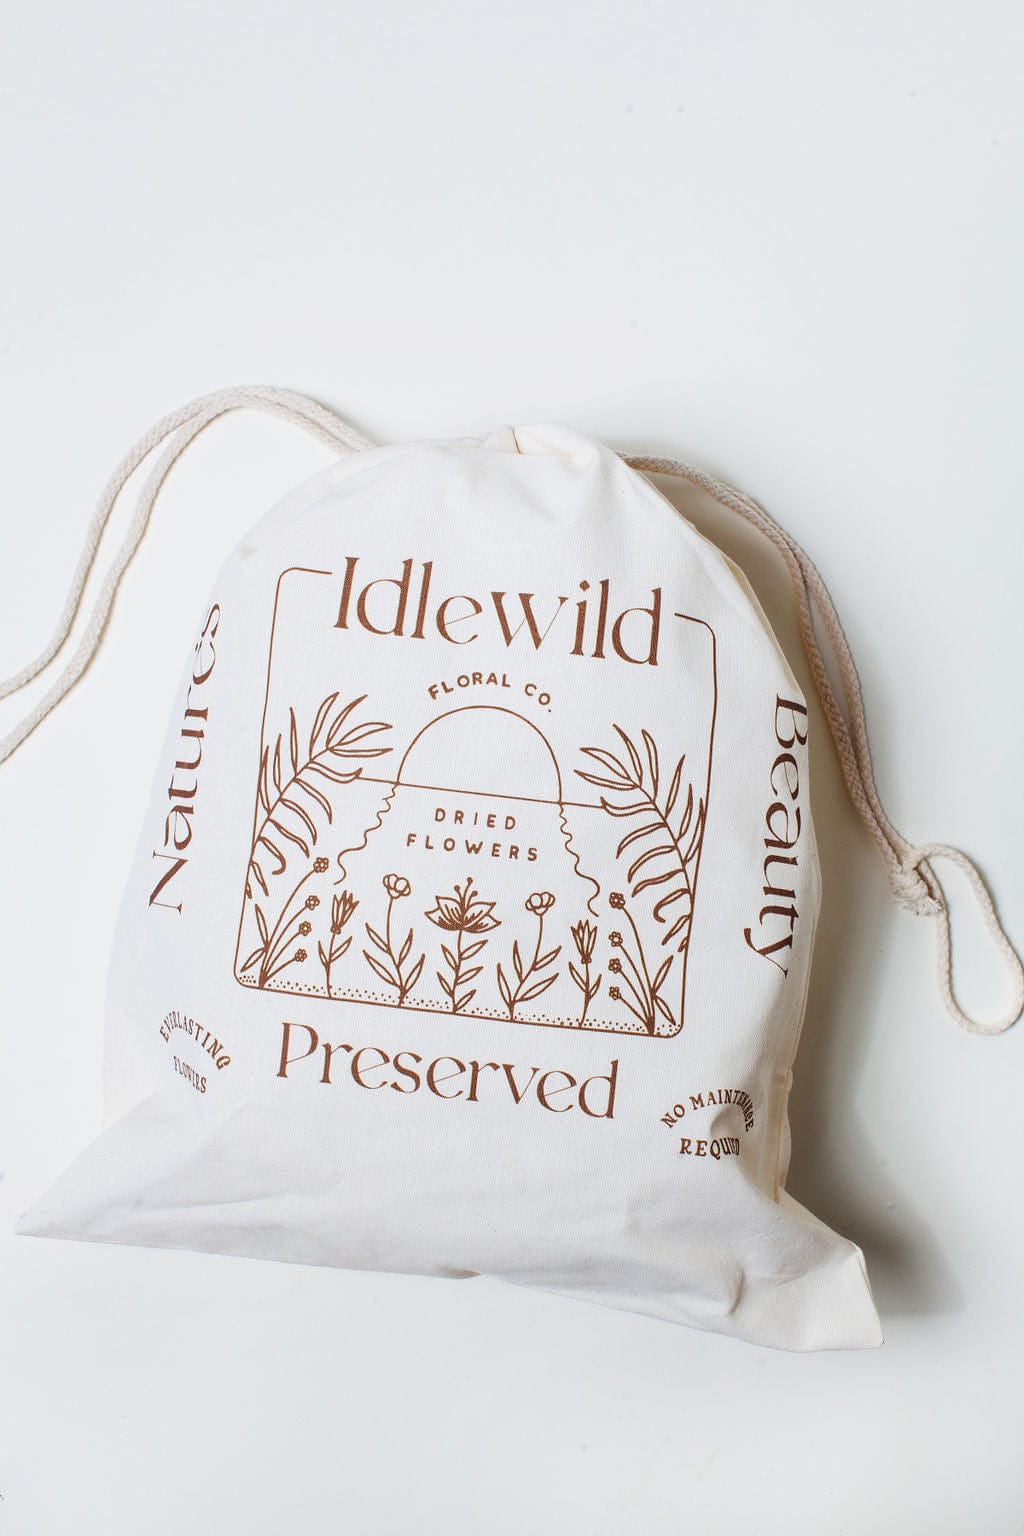 Idlewild Floral Co. Gift Giving Cookies & Flowers Gift Bag